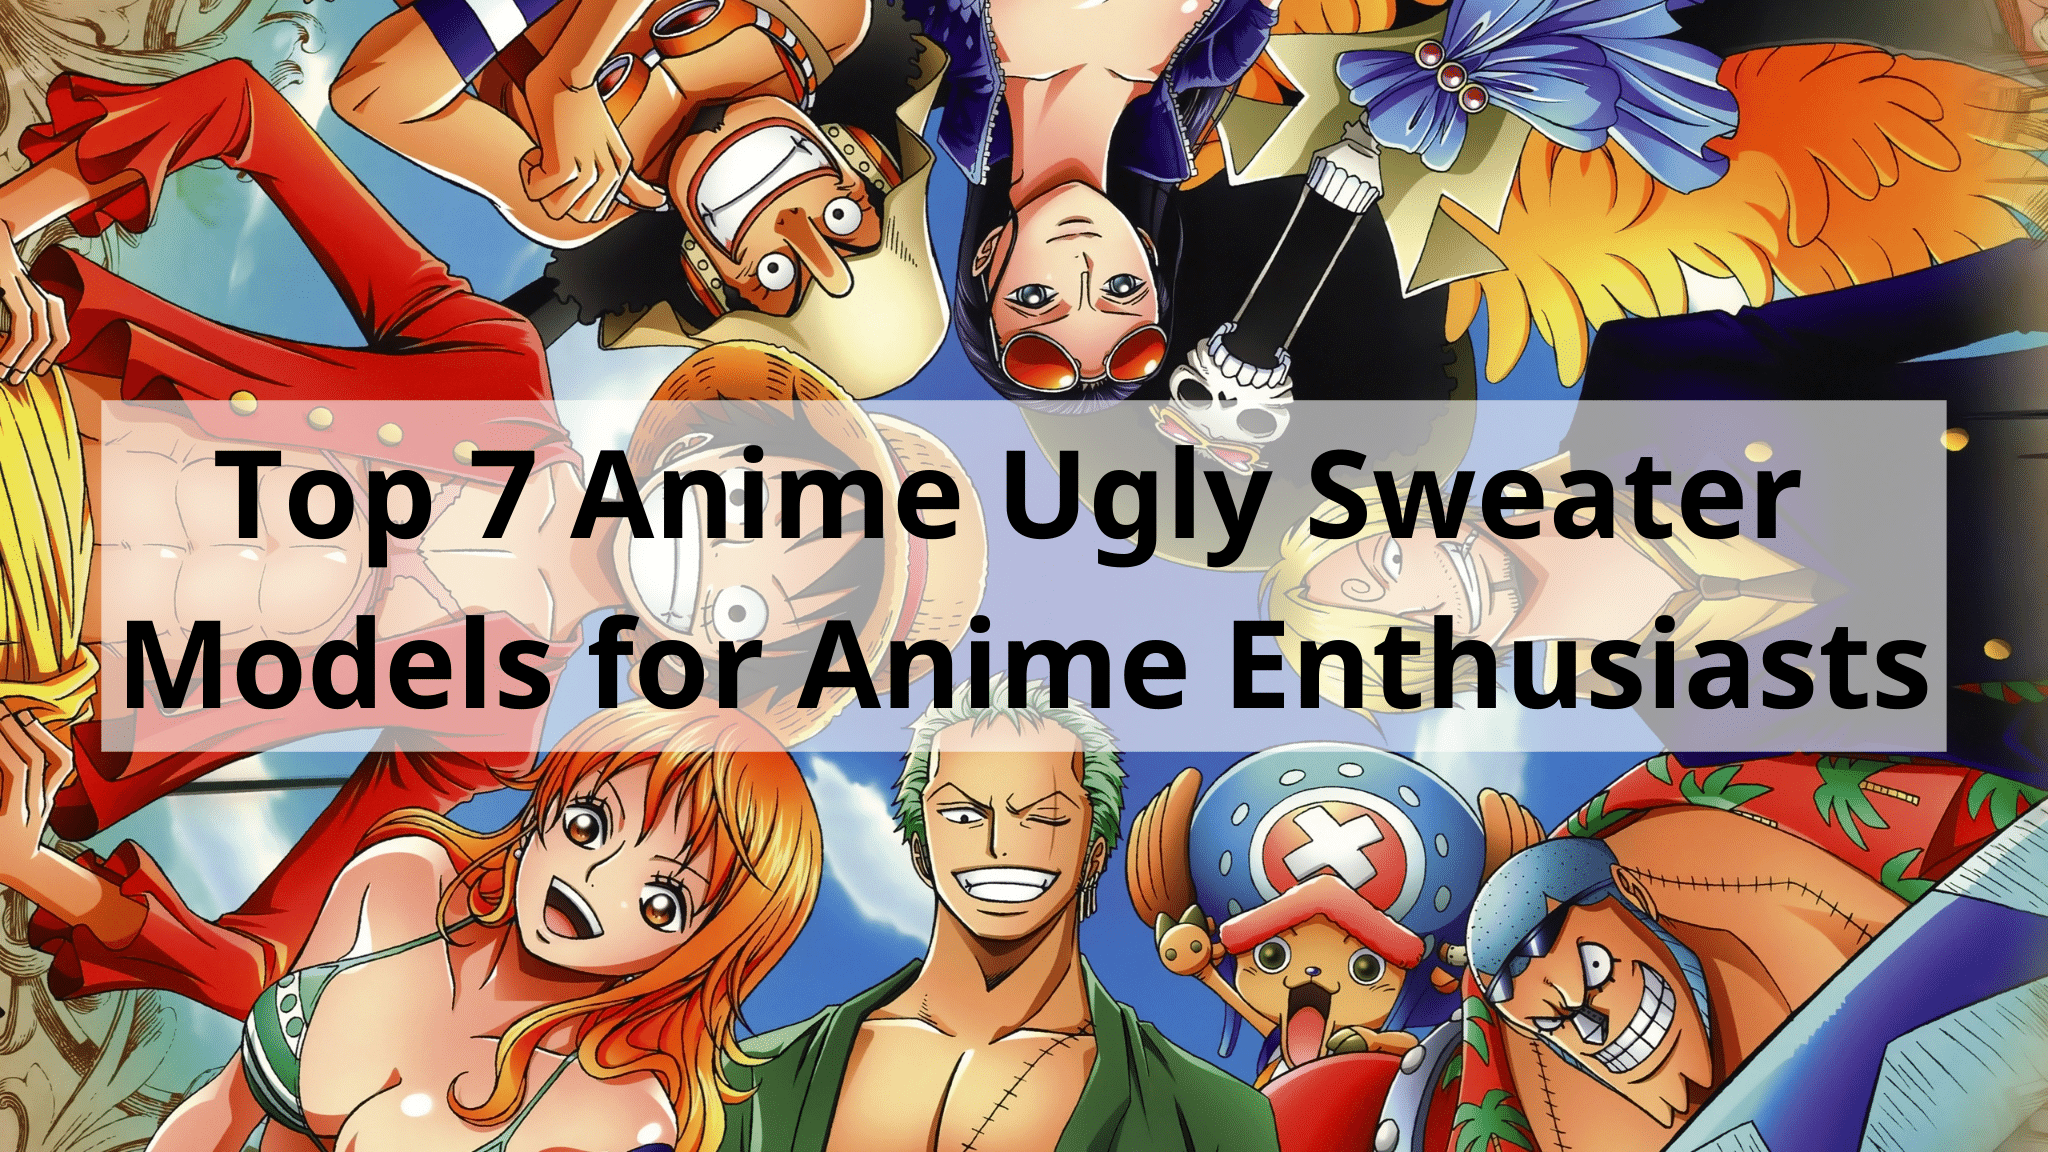 Top 7 Anime Ugly Sweater Models for Anime Enthusiasts